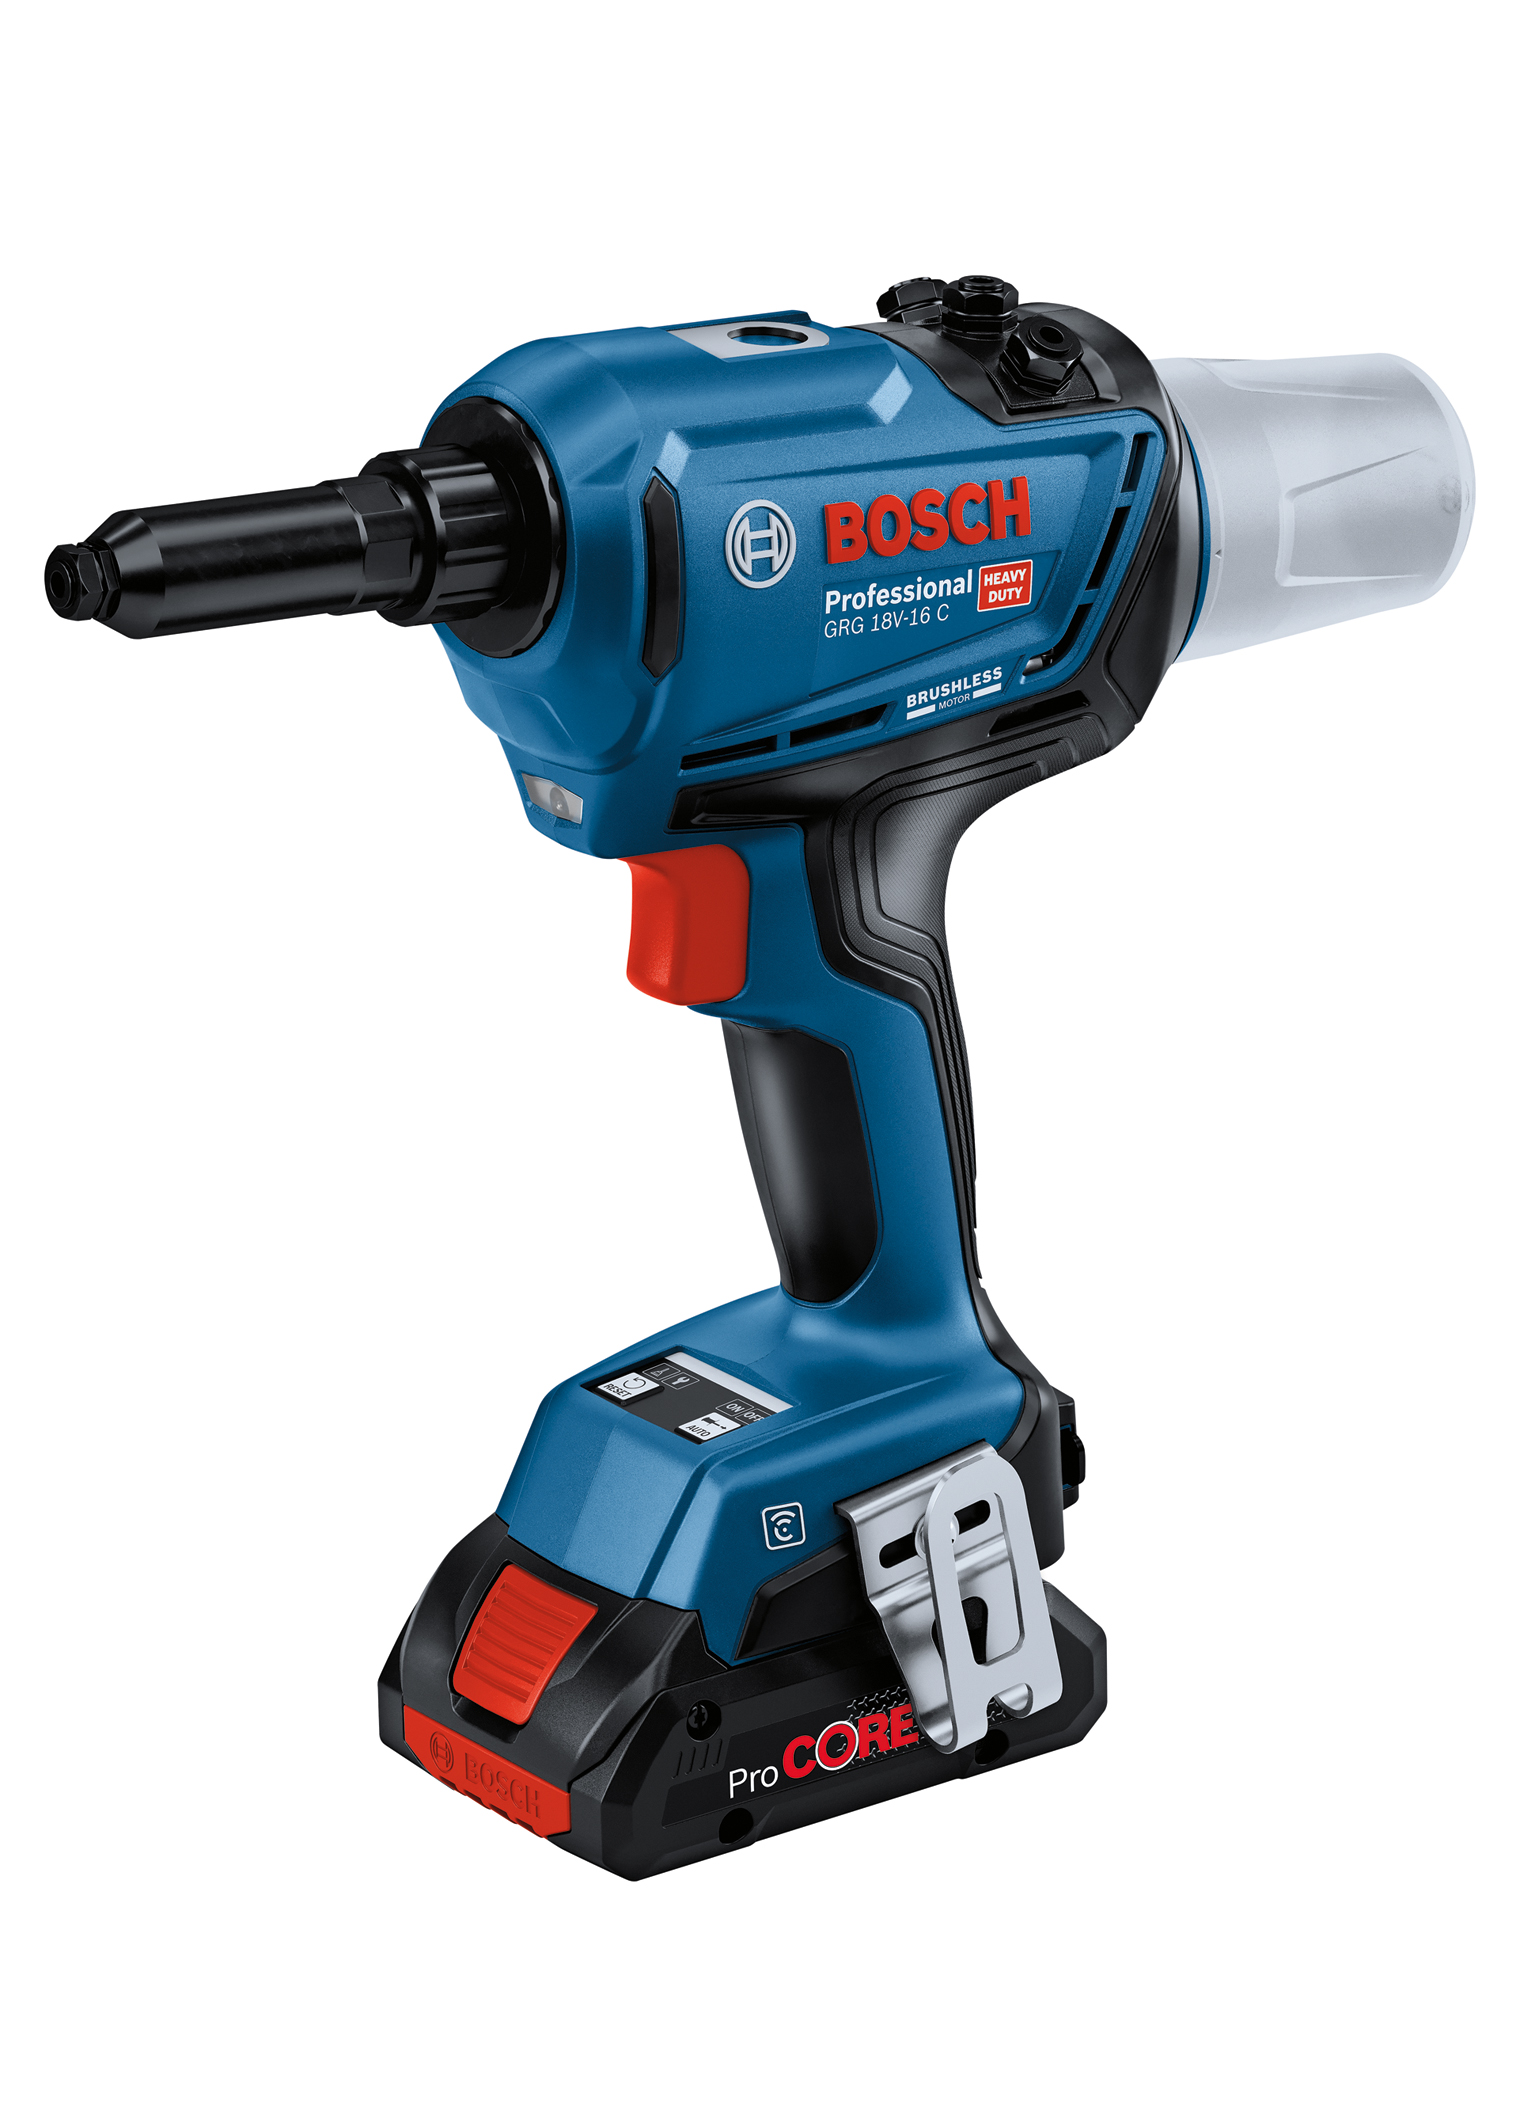 Strong expansion in the ‘Professional 18V System’: First cordless rivet gun from Bosch for professionals